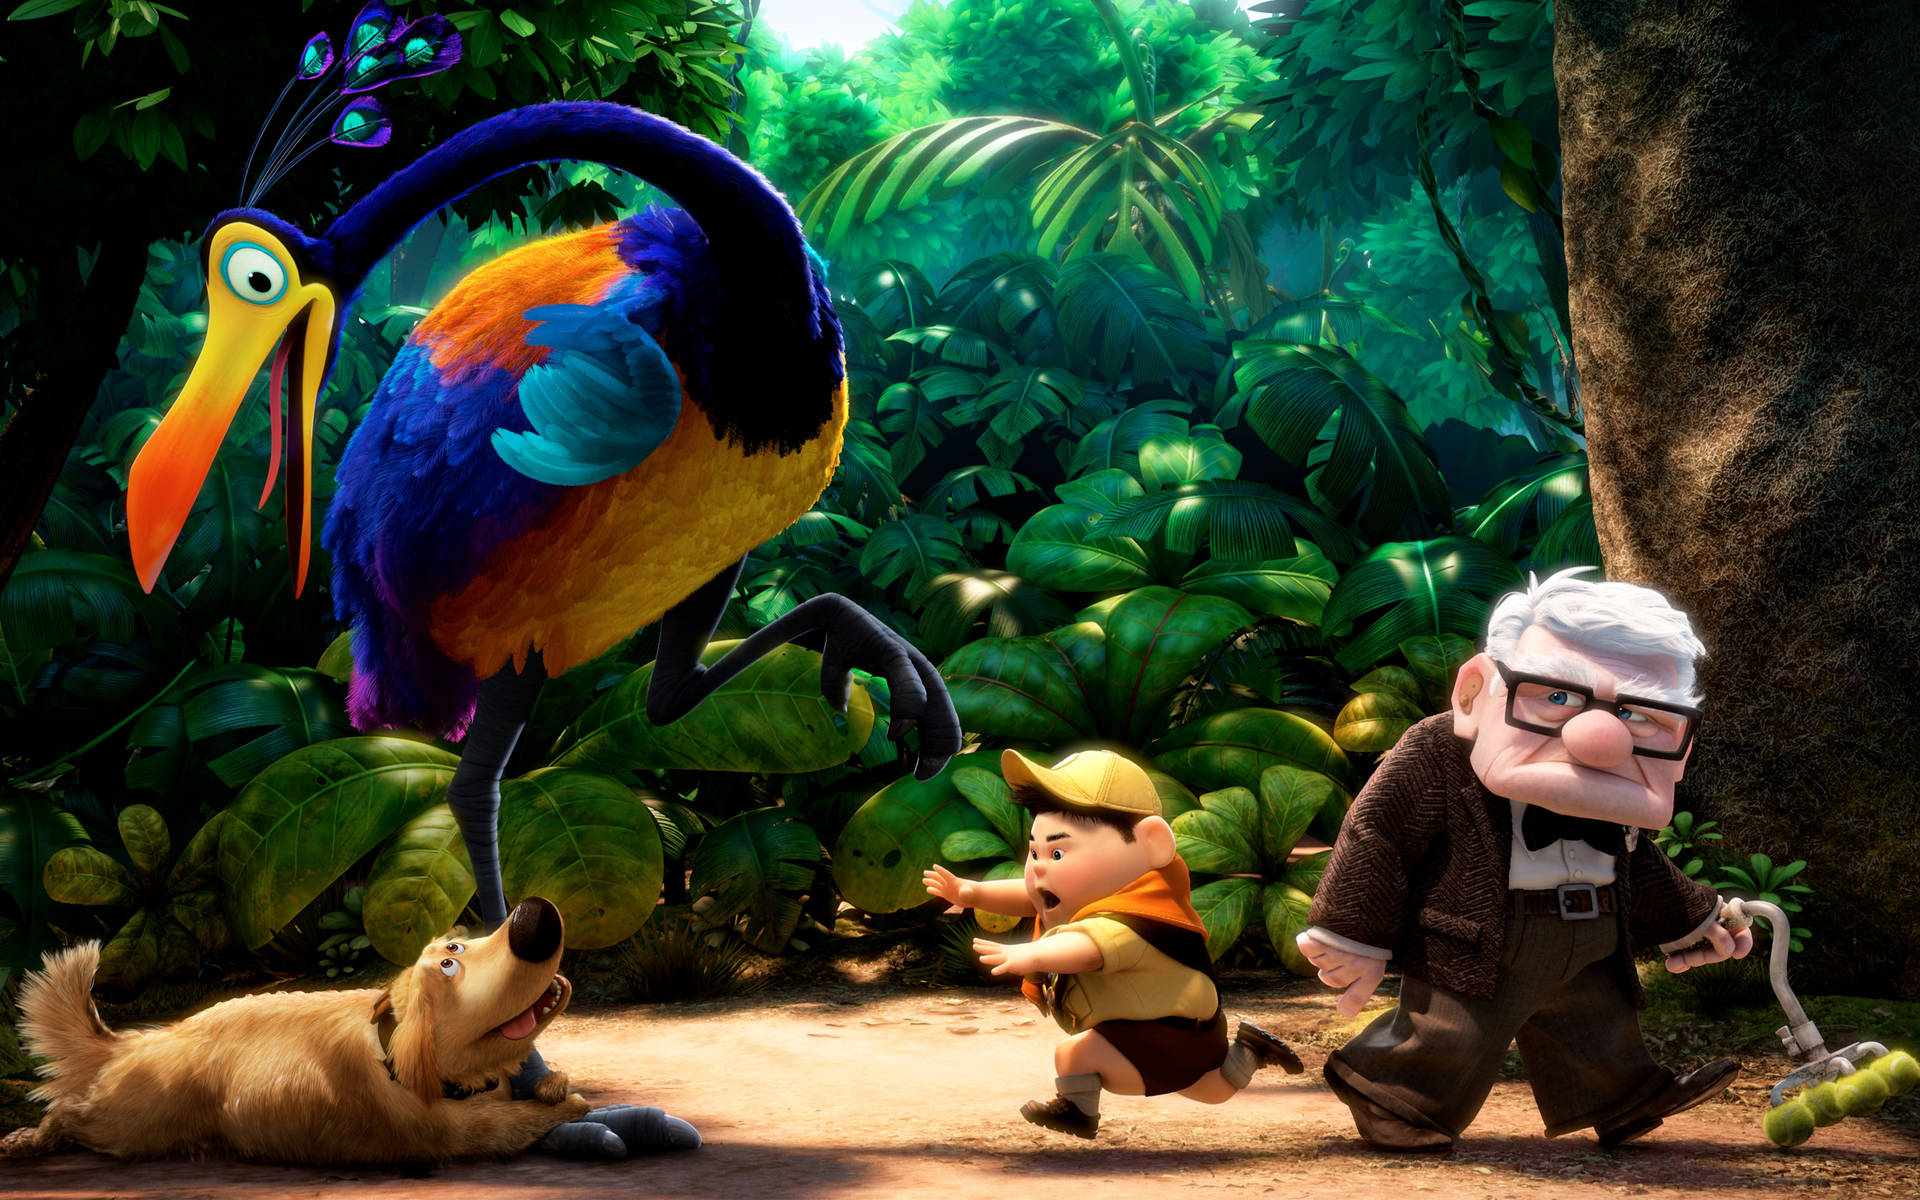 Up Characters In A Jungle